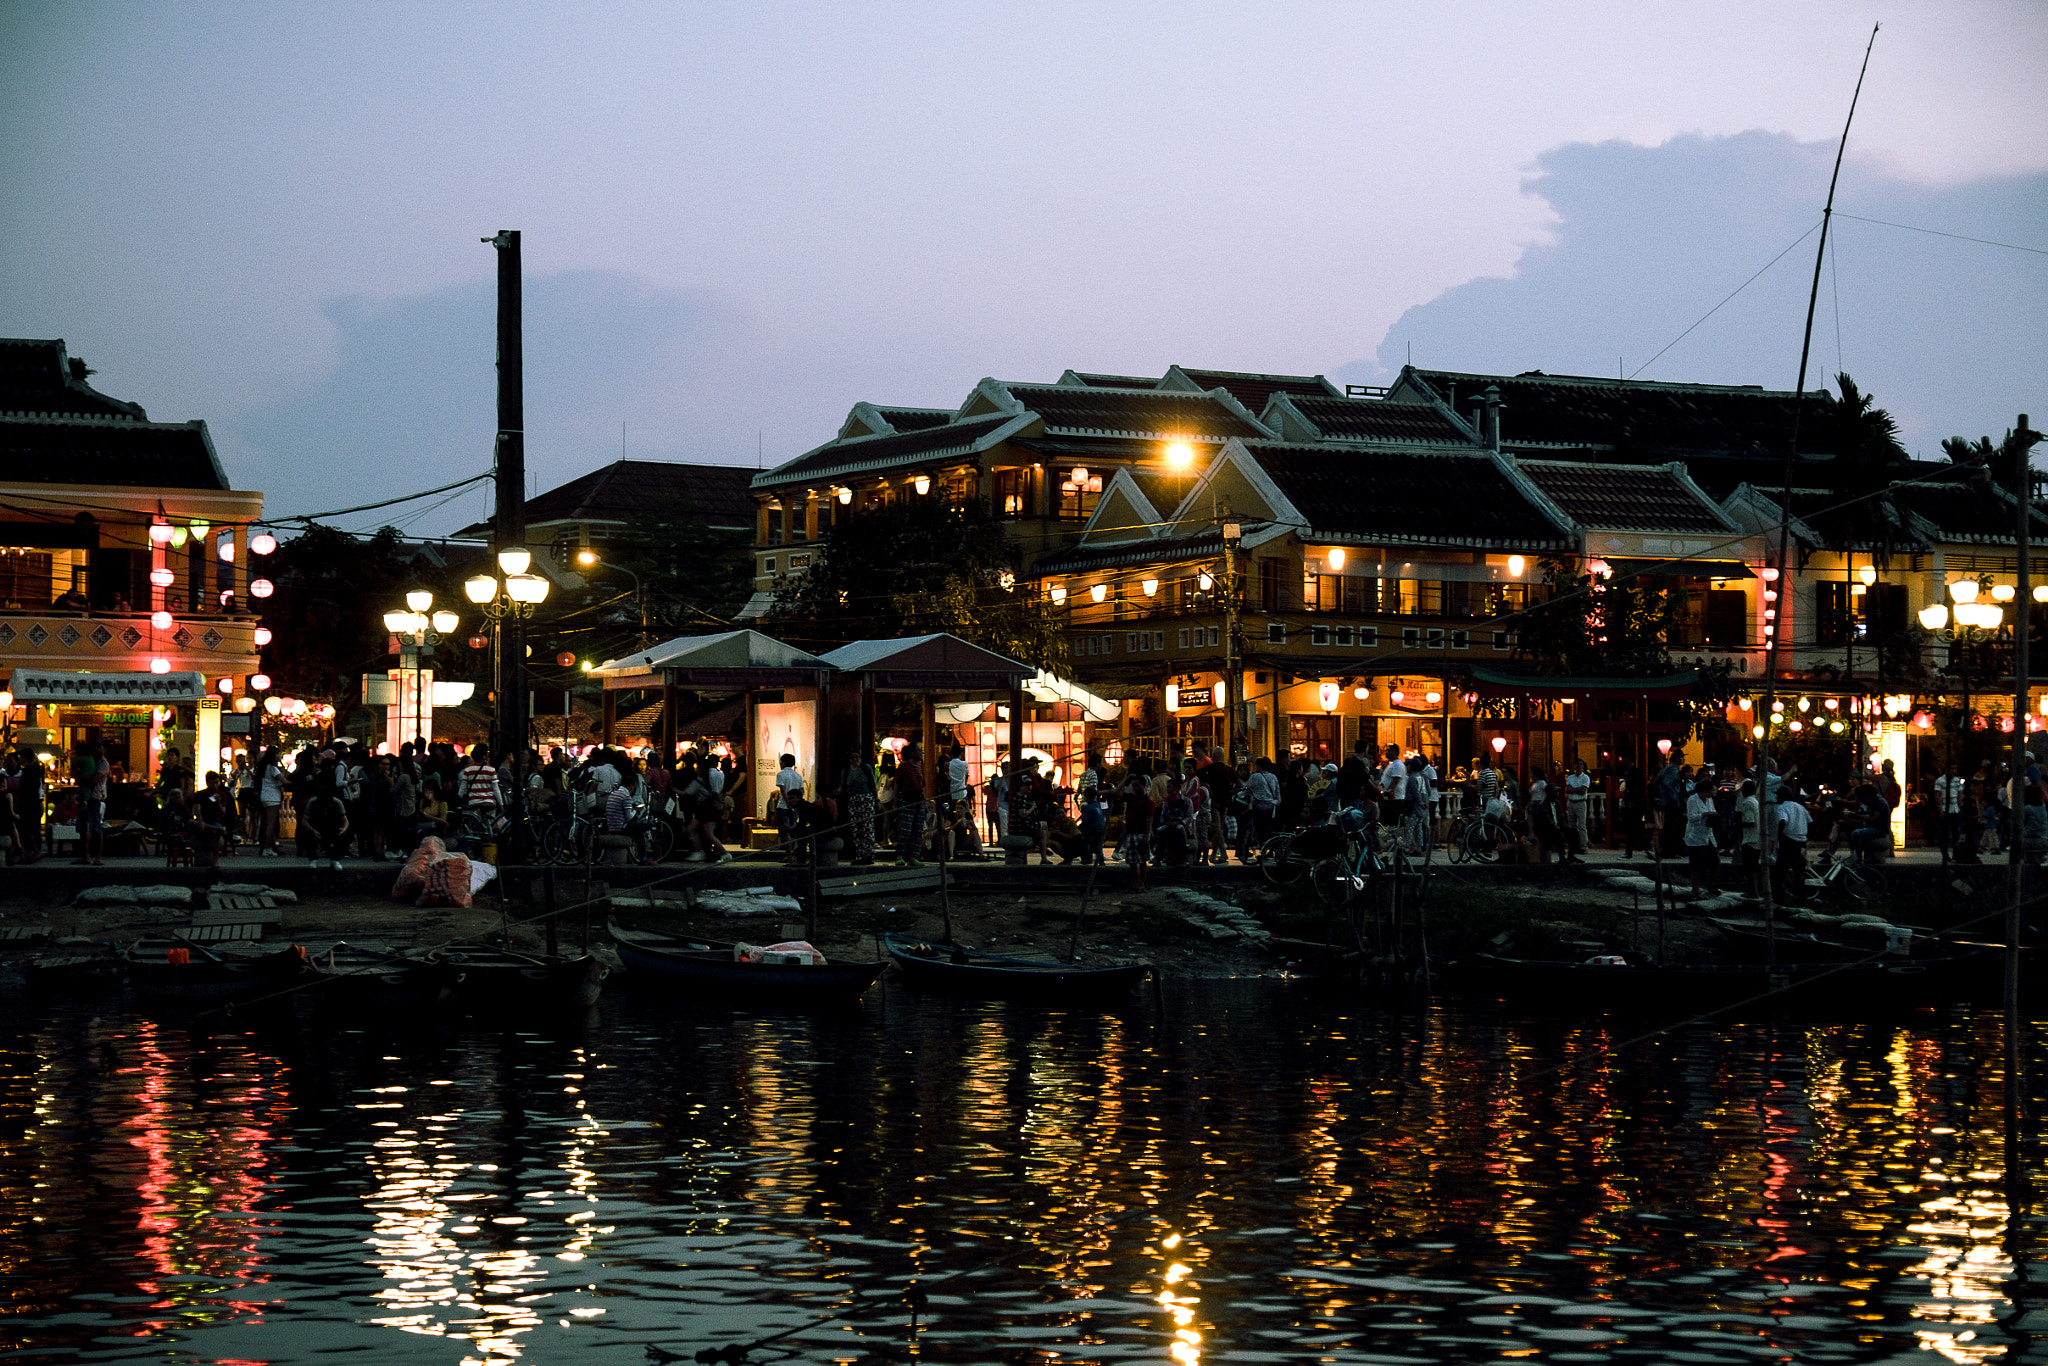 Fujifilm X-T10 + Fujifilm XF 16-55mm F2.8 R LM WR sample photo. Another night in hoi an photography